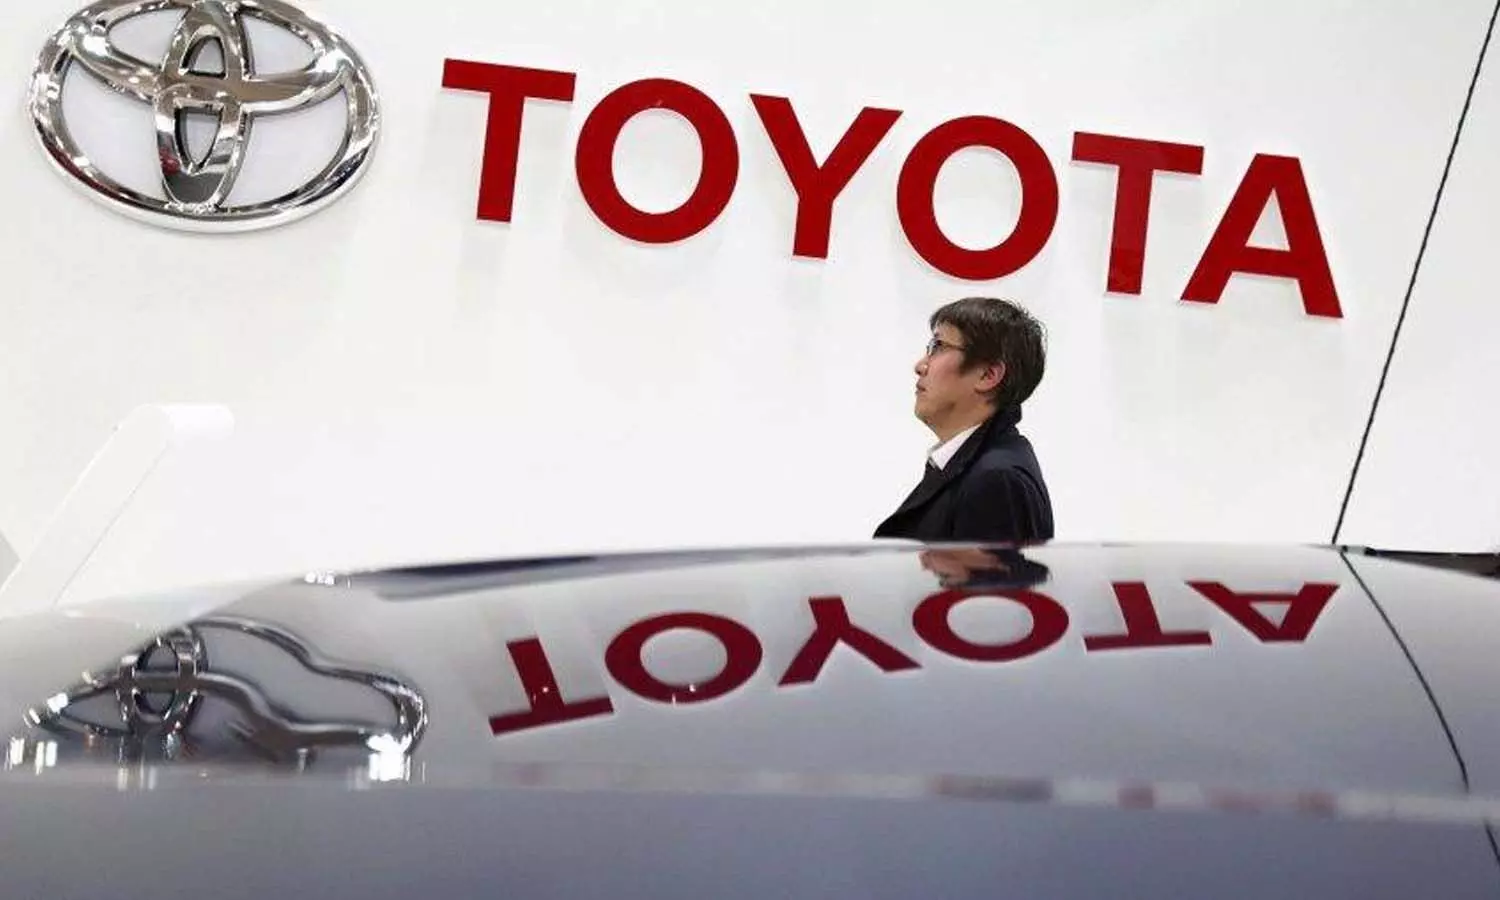 Toyota: Toyota became number one in automobile sales, behind General Motors of America